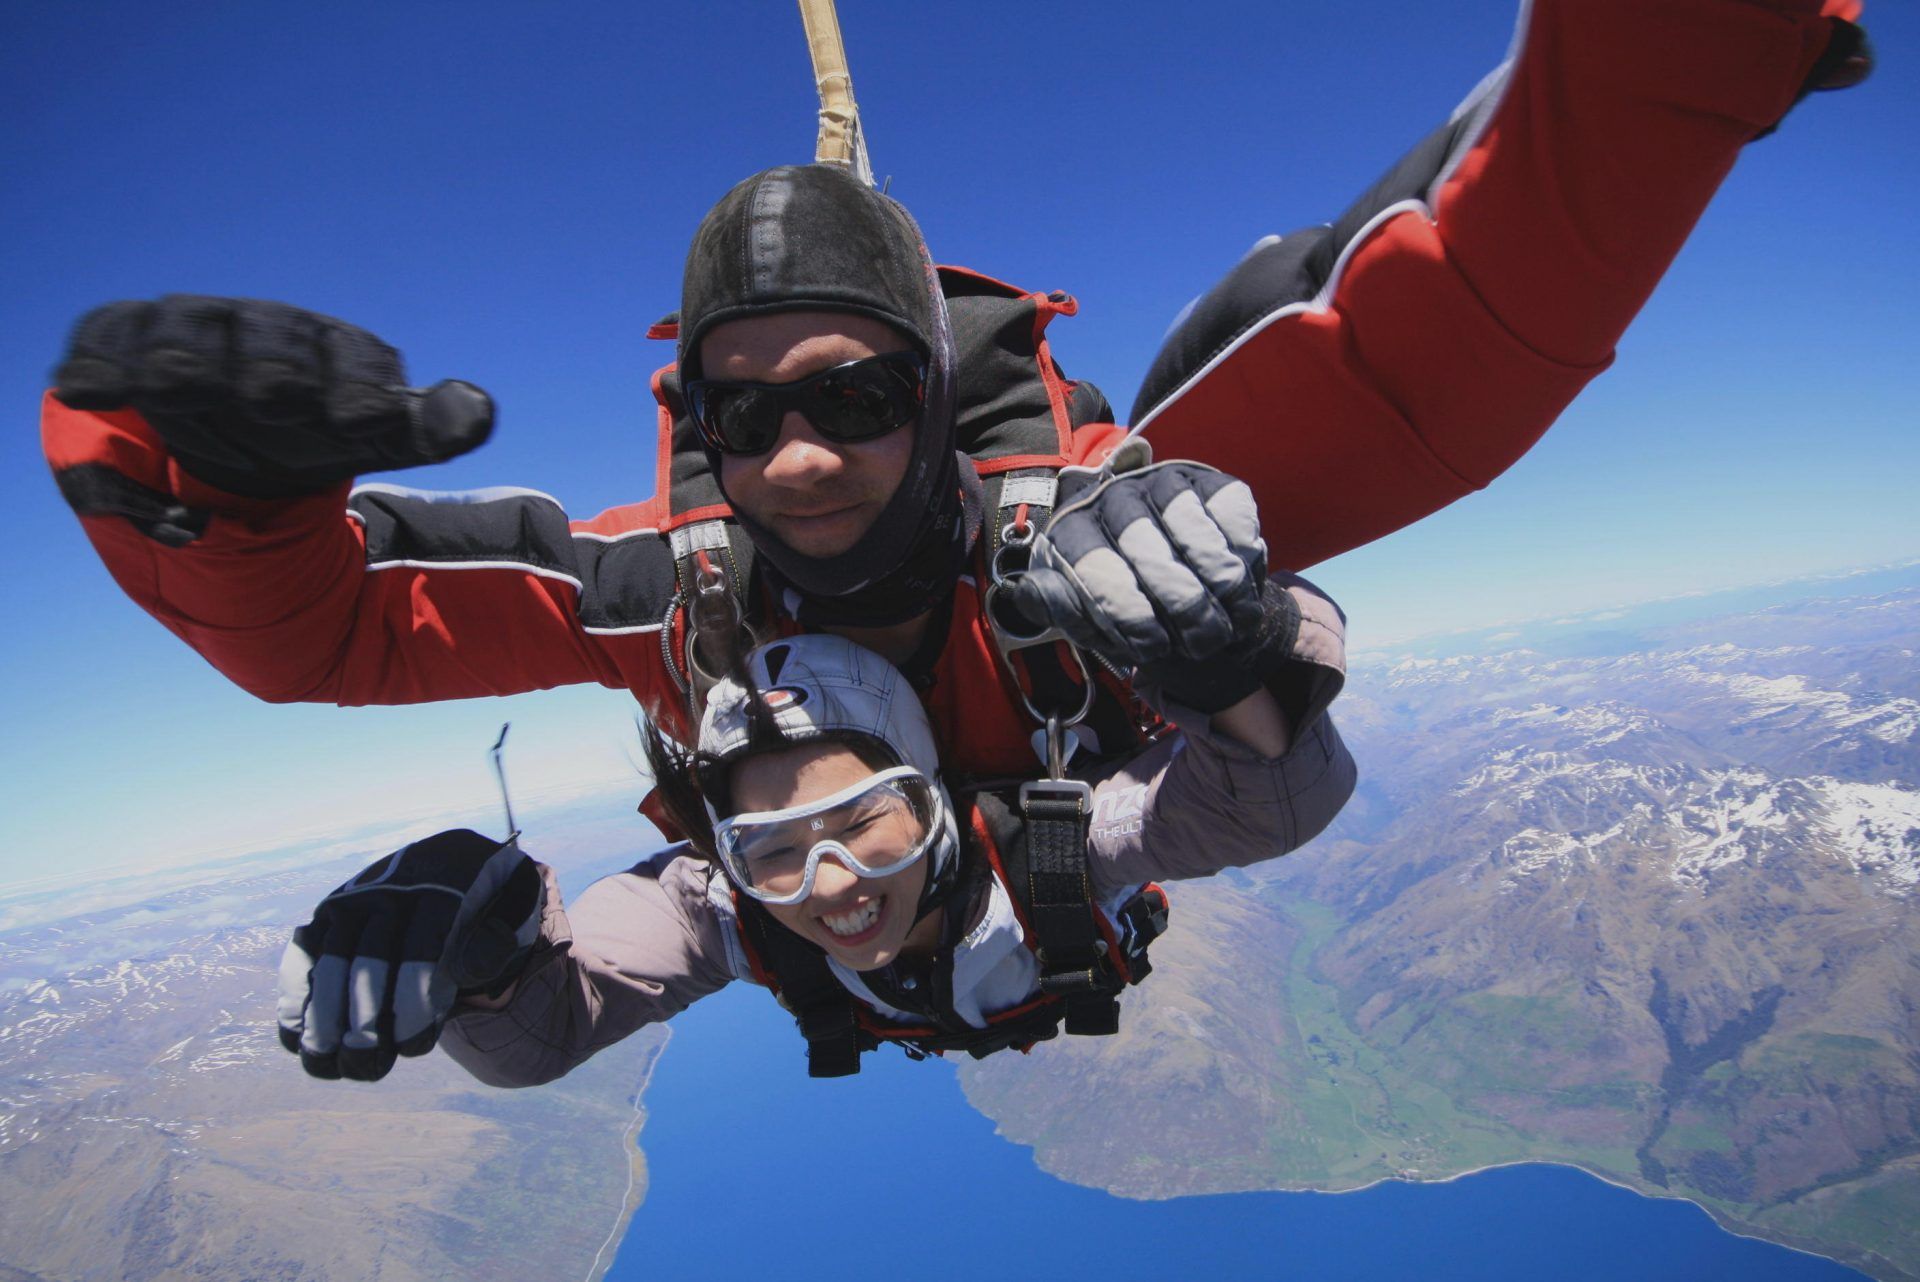 New Zealand Suffers Shortage of Skydiving Instructors as Chinese Adventure Travel Takes Off